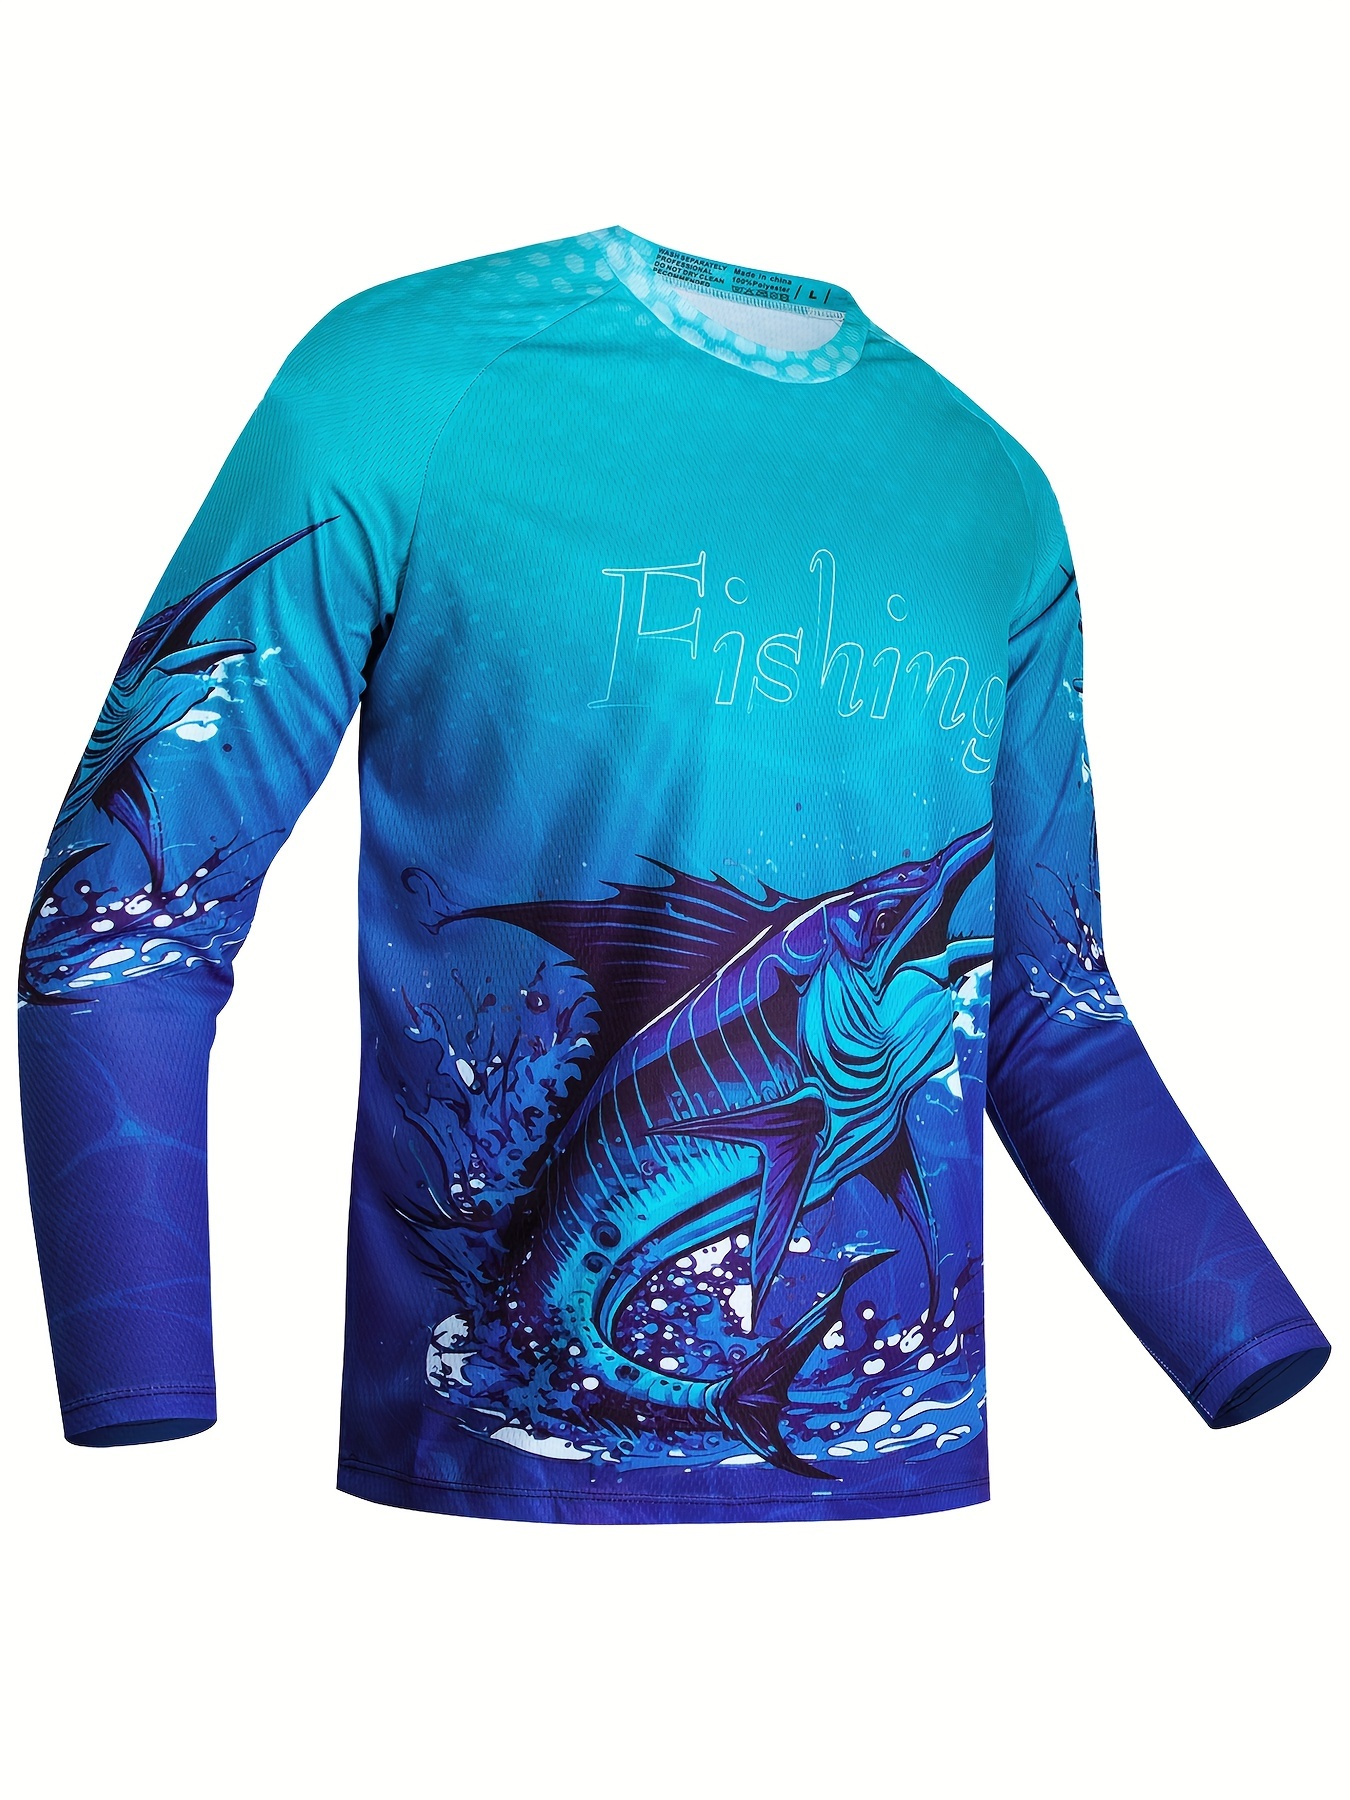 Fish Scale Digital Print Men's Long Sleeve Stretch Sunscreen Rash Guard, Lightweight and Breathable Men's Round Neck Sports Shirt, Outdoor Fishing